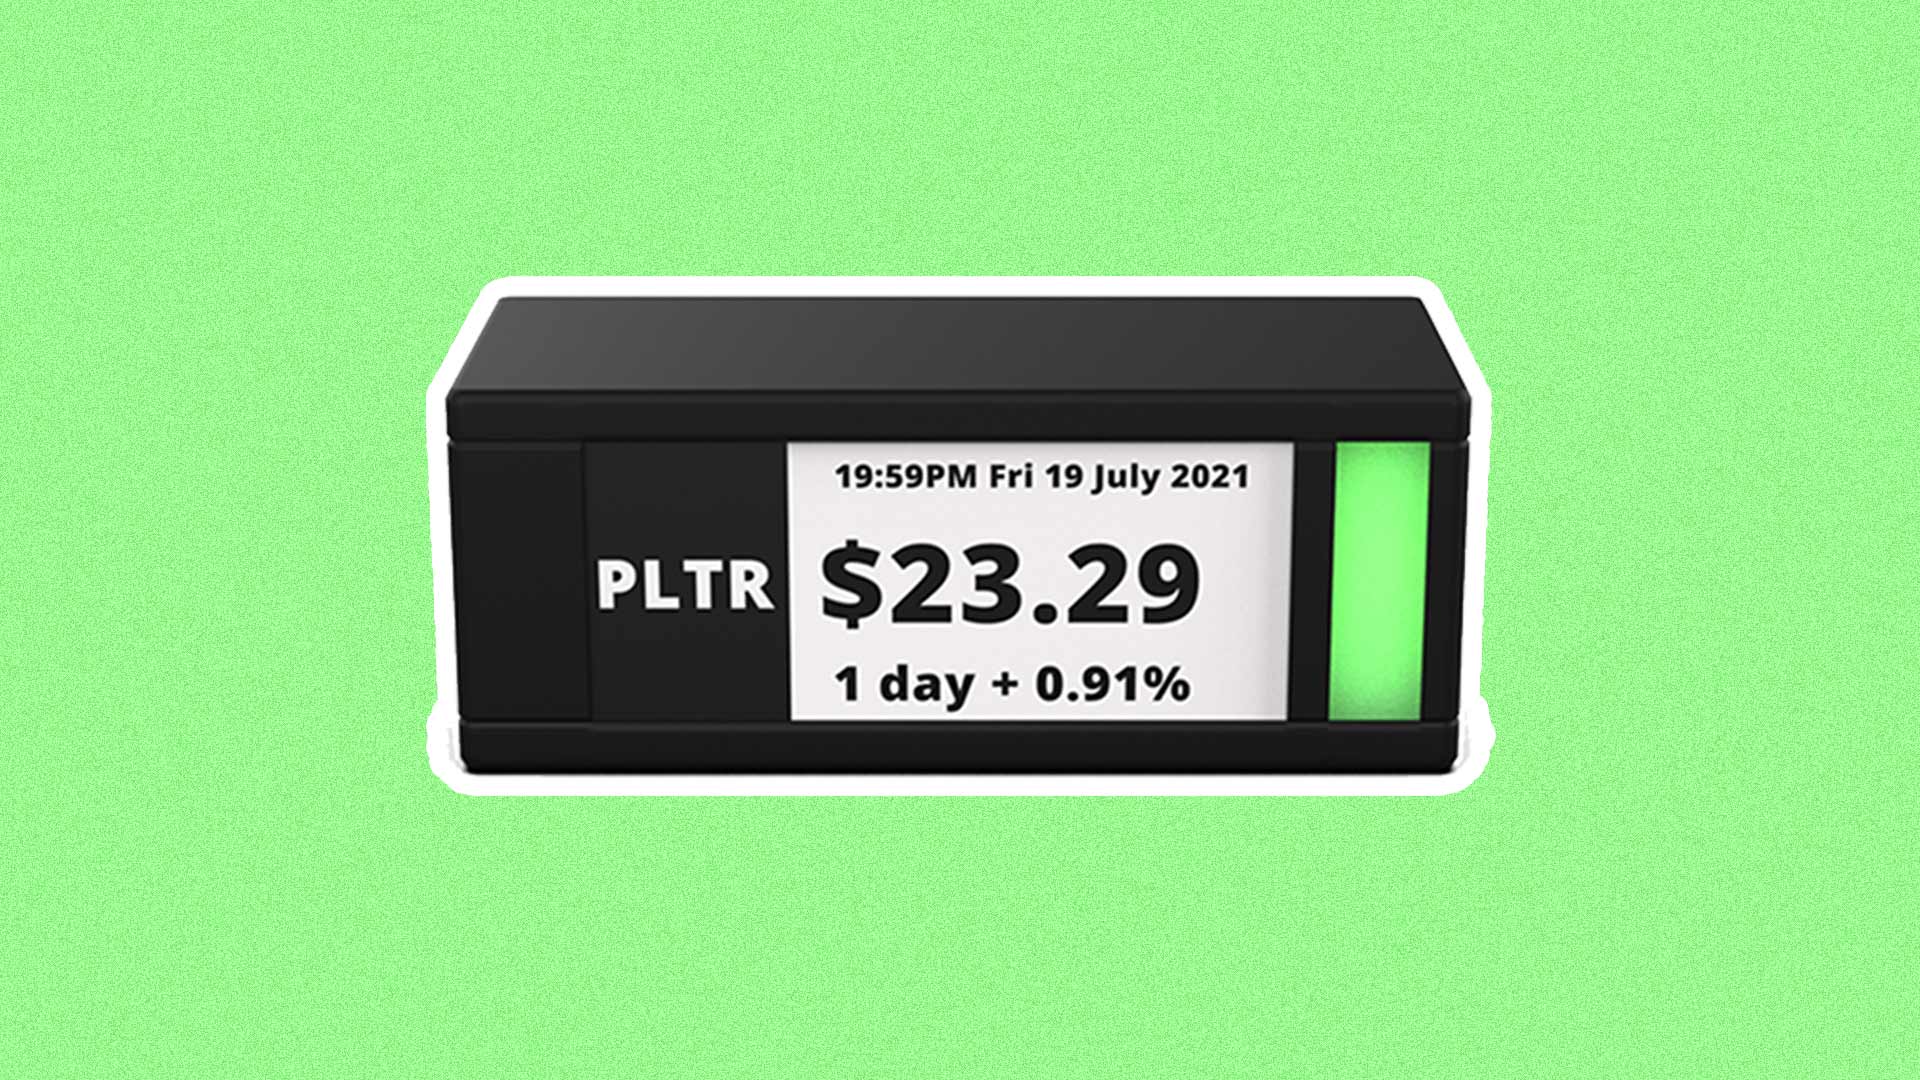 This Device turns your Desk Into a Stock Ticker Display